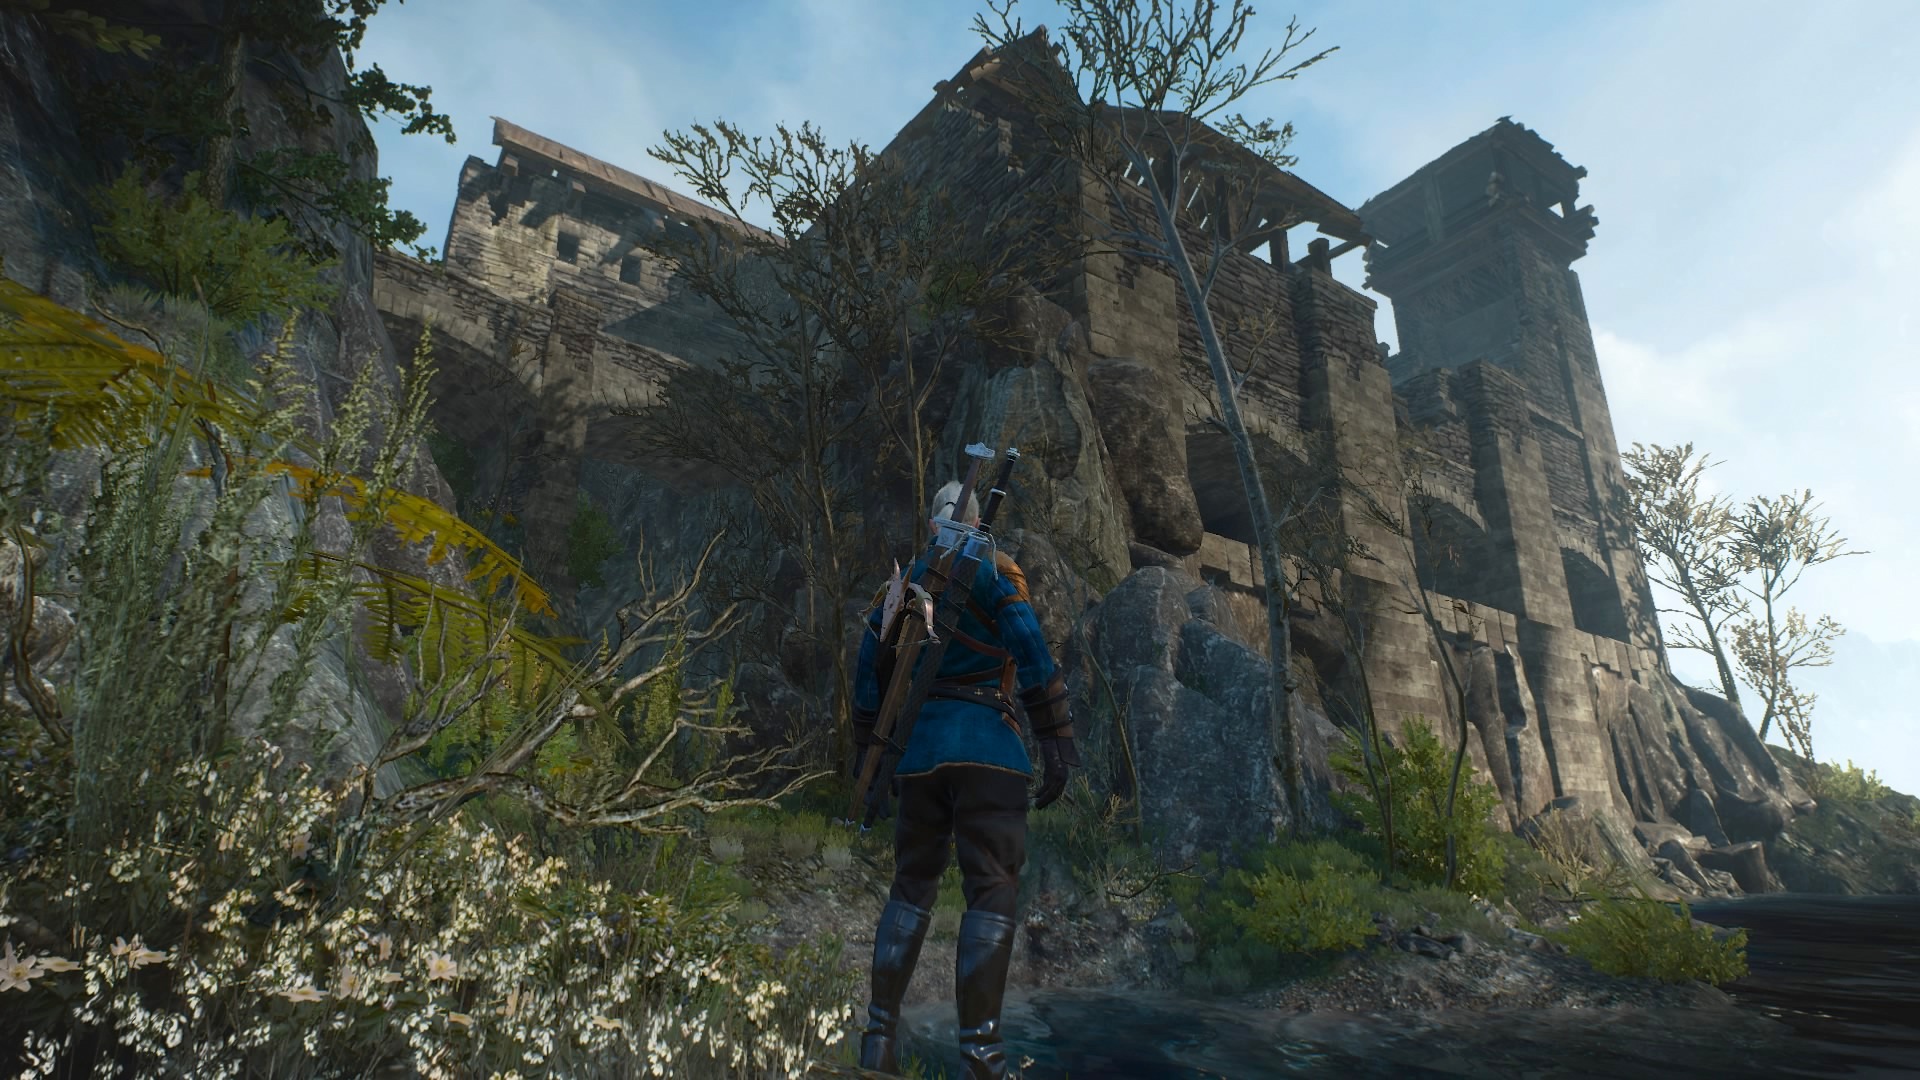 witcher 3 castle on fire